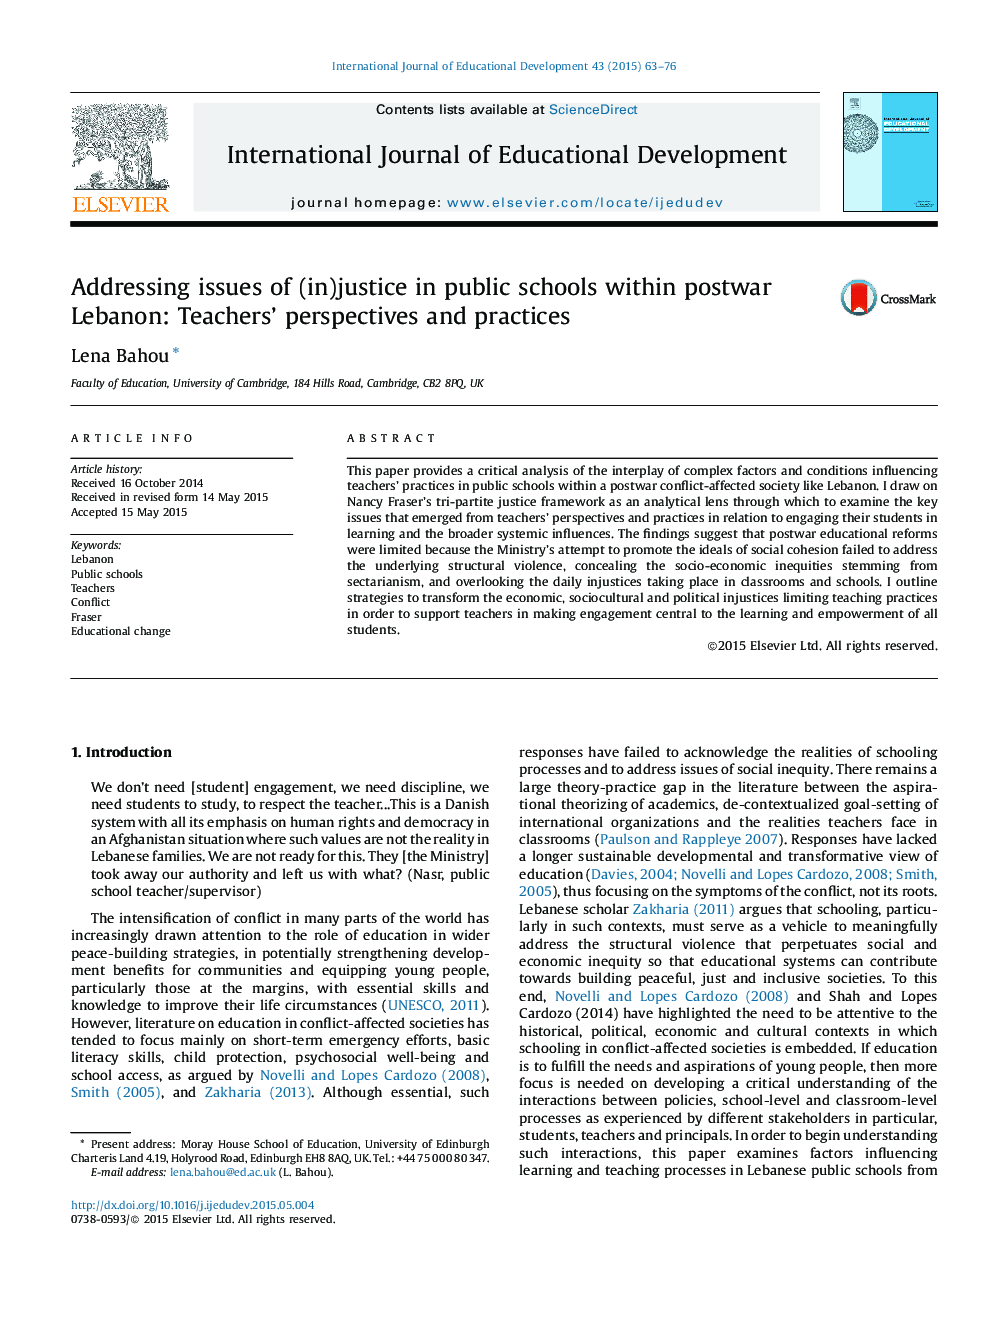 Addressing issues of (in)justice in public schools within postwar Lebanon: Teachers’ perspectives and practices